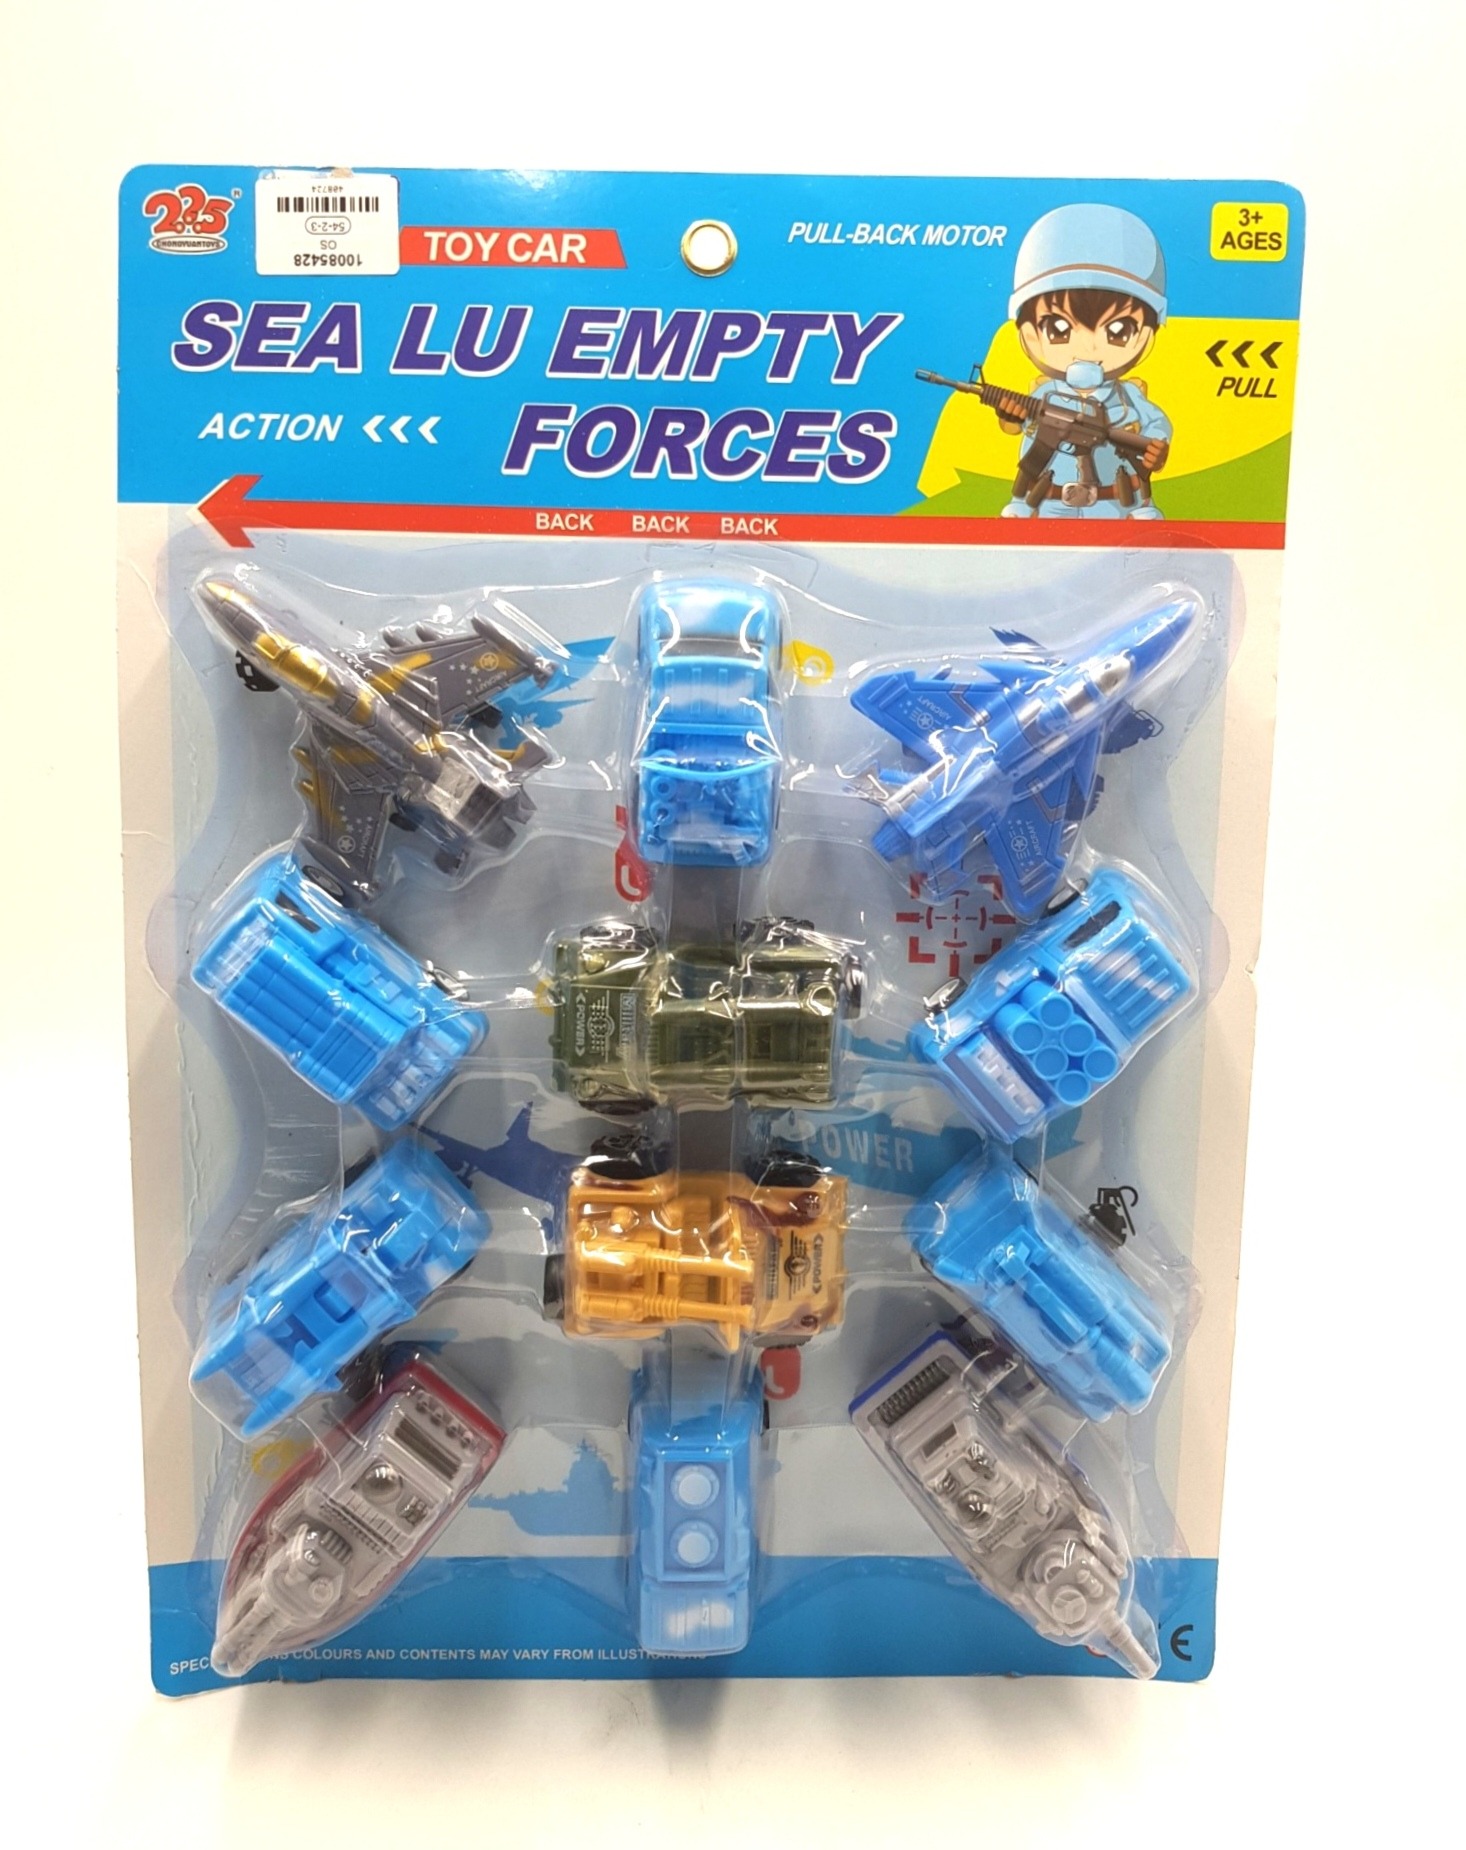 vehicles, fighter planes, warships, military vehicles